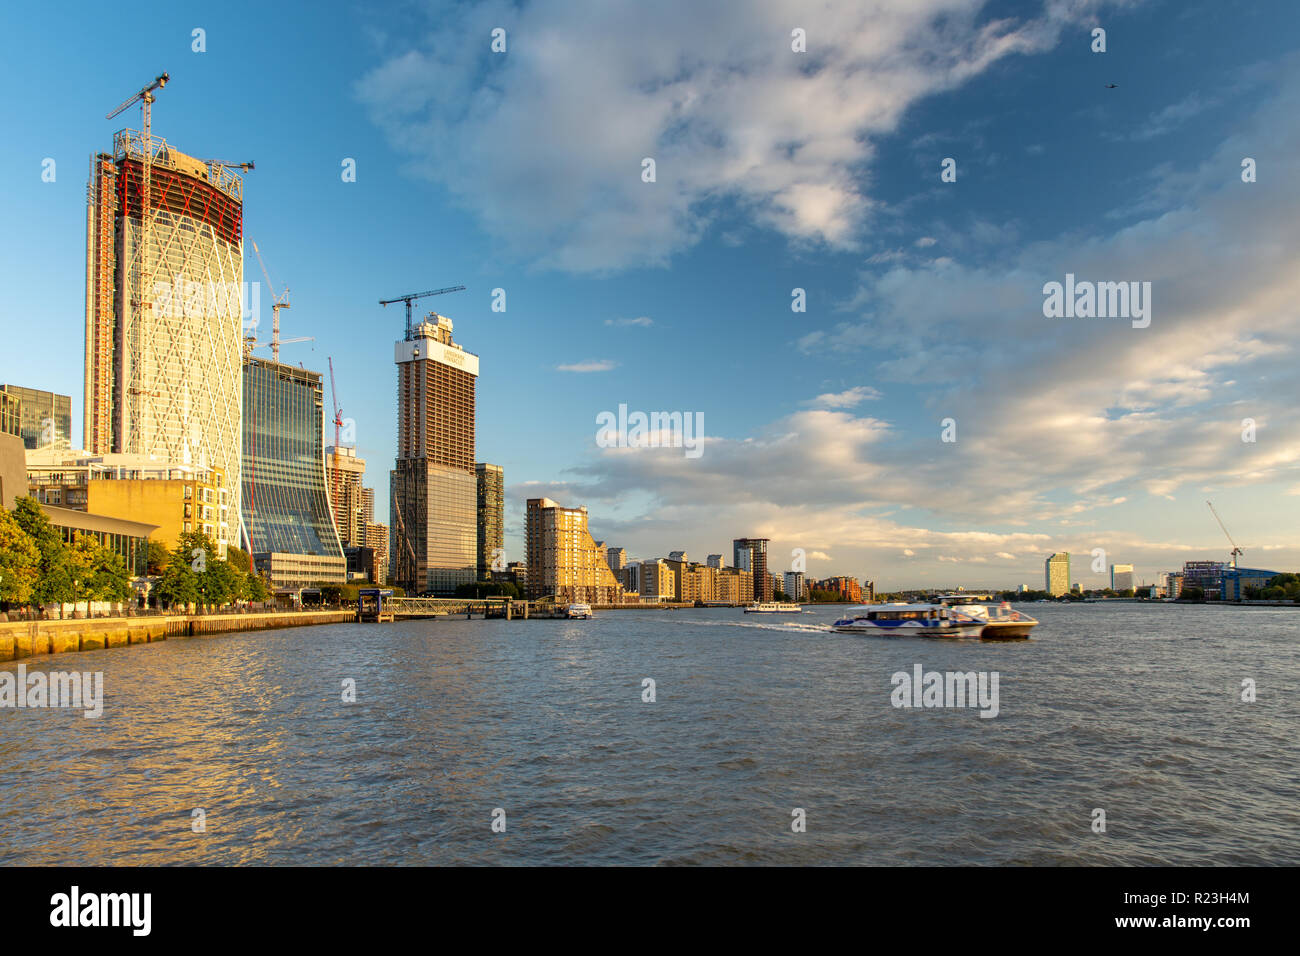 London, England, UK - September 14, 2018: A Thames Clipper ferry leaves Canary Wharf pier under a cluster of new skyscrapers currently being built on  Stock Photo